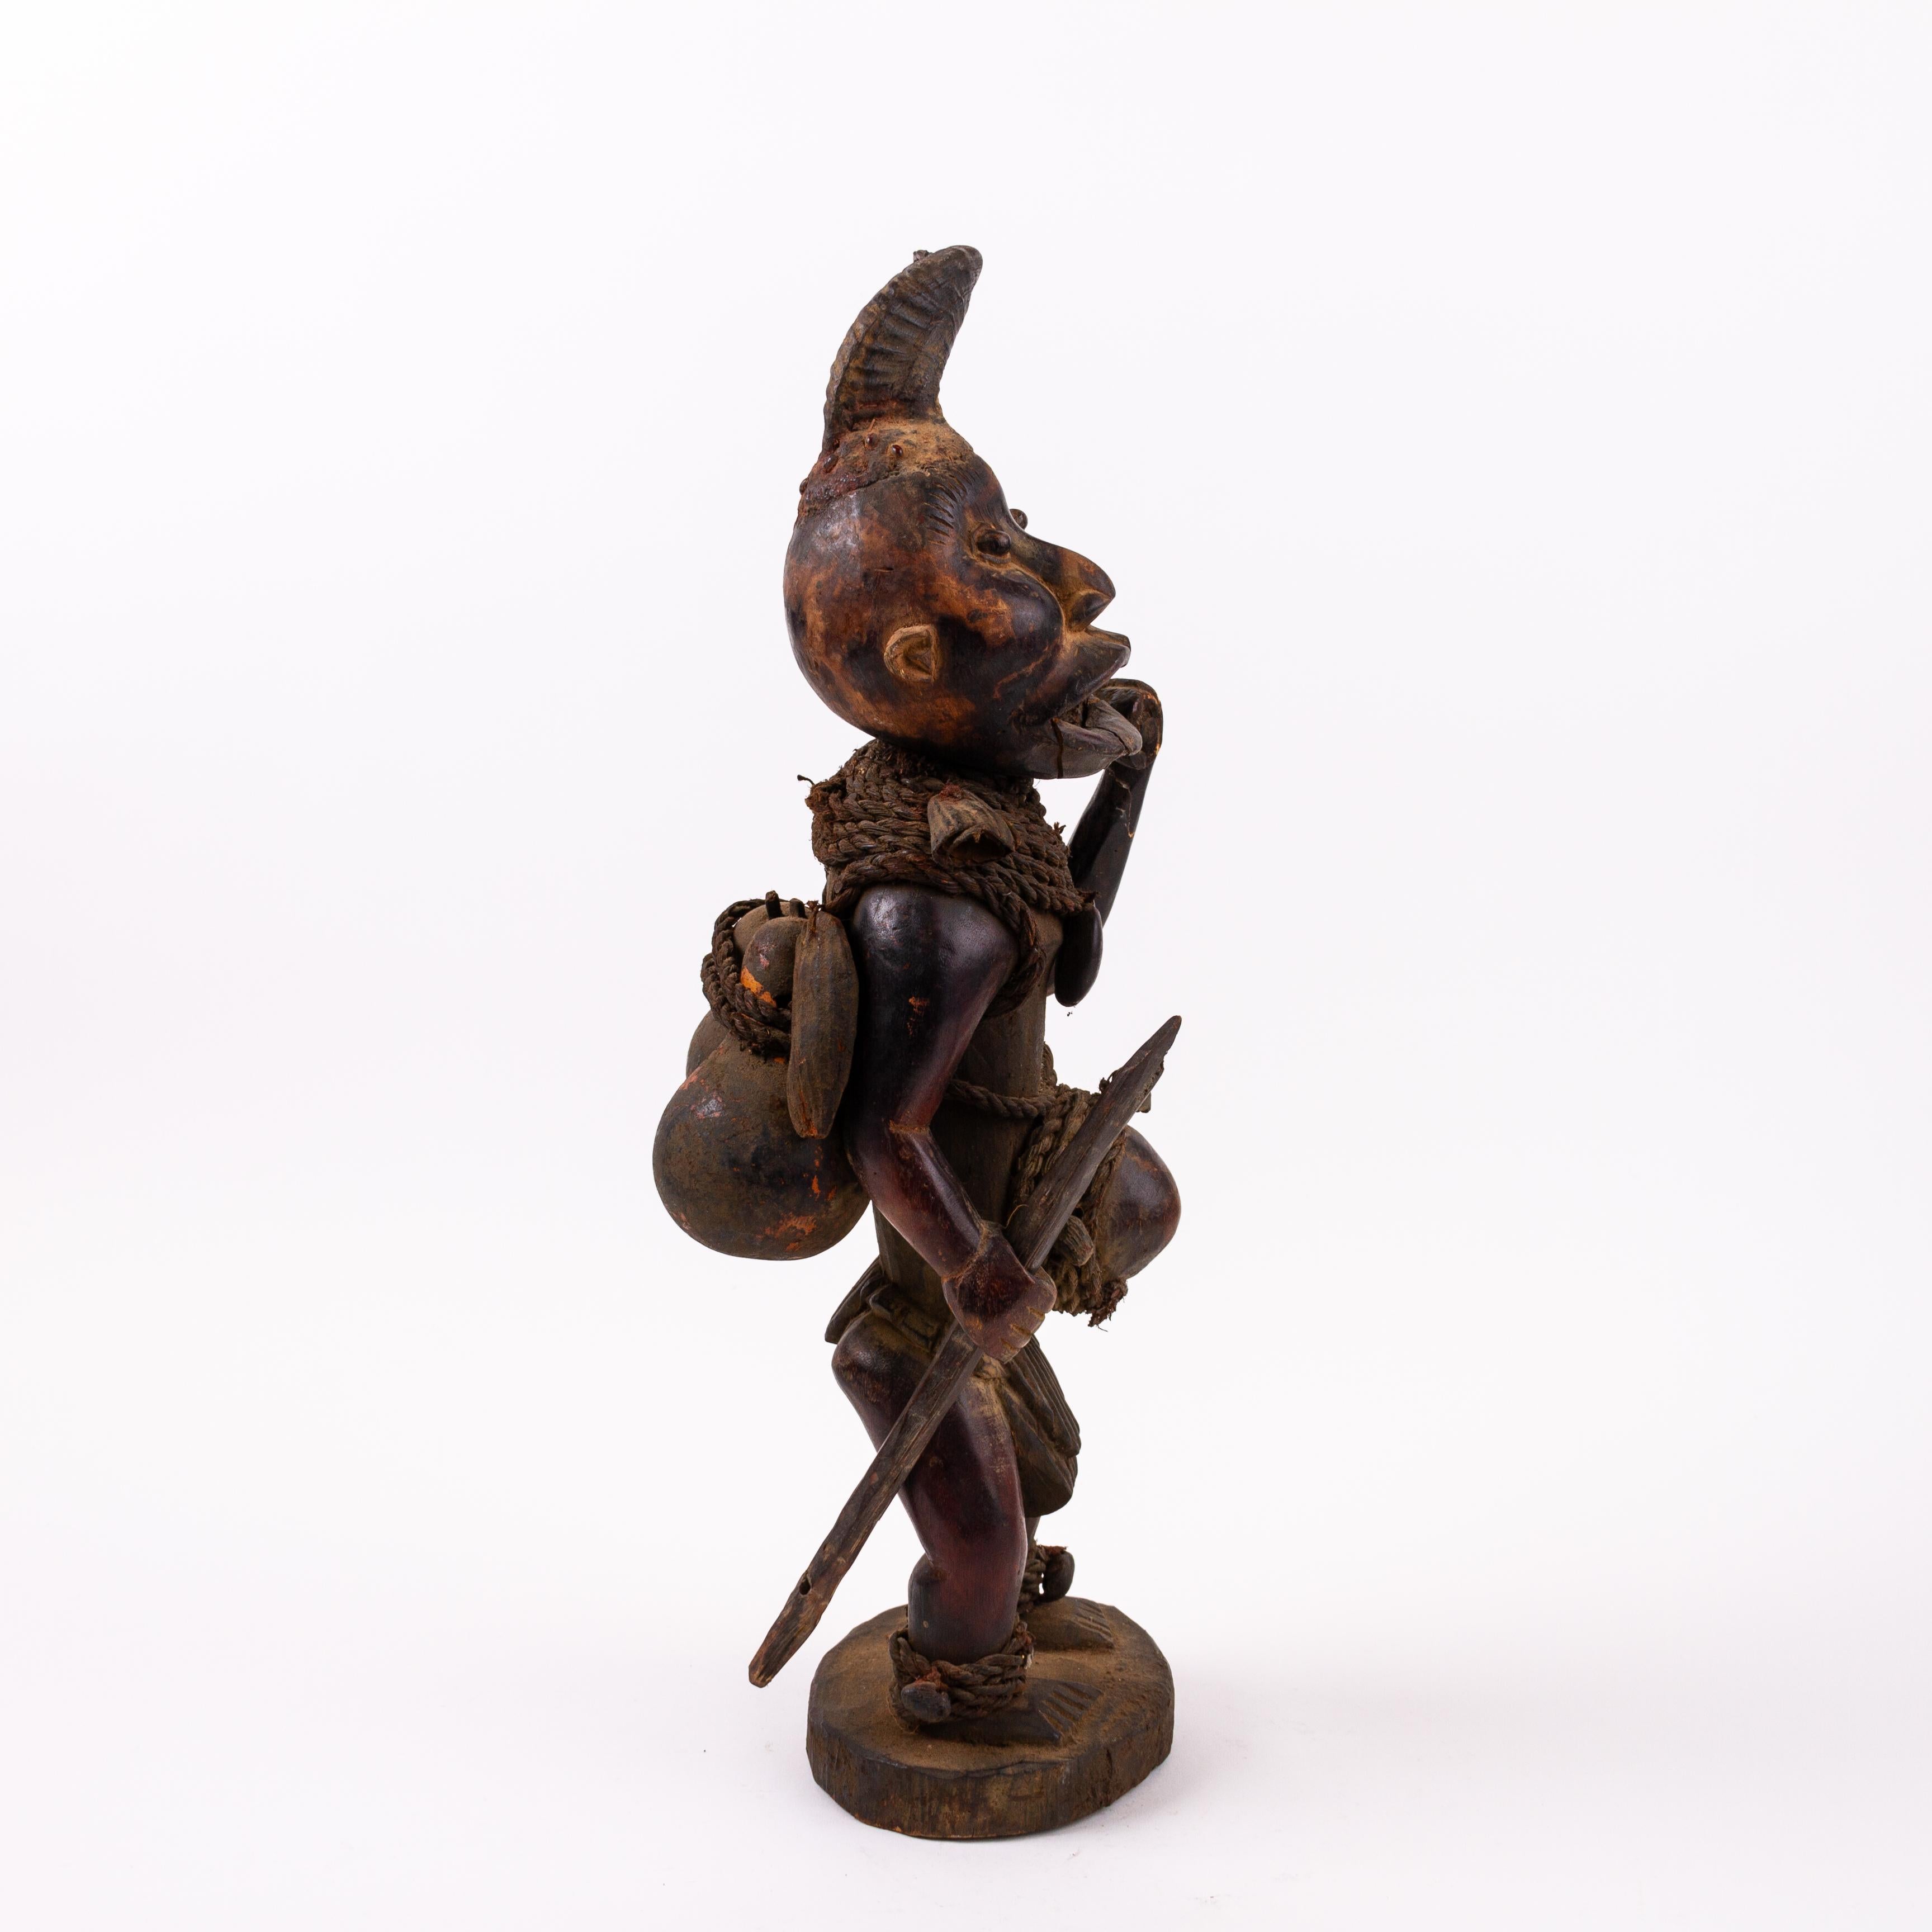 African Tribal Art Kongo-Yombe Hunter Sculpture Statue 19th Century 
Good condition overall, see photos.
From a private collection.

African Tribal Art, specifically the Kongo-Yombe Hunter Statue, is a representation of the artistic traditions and